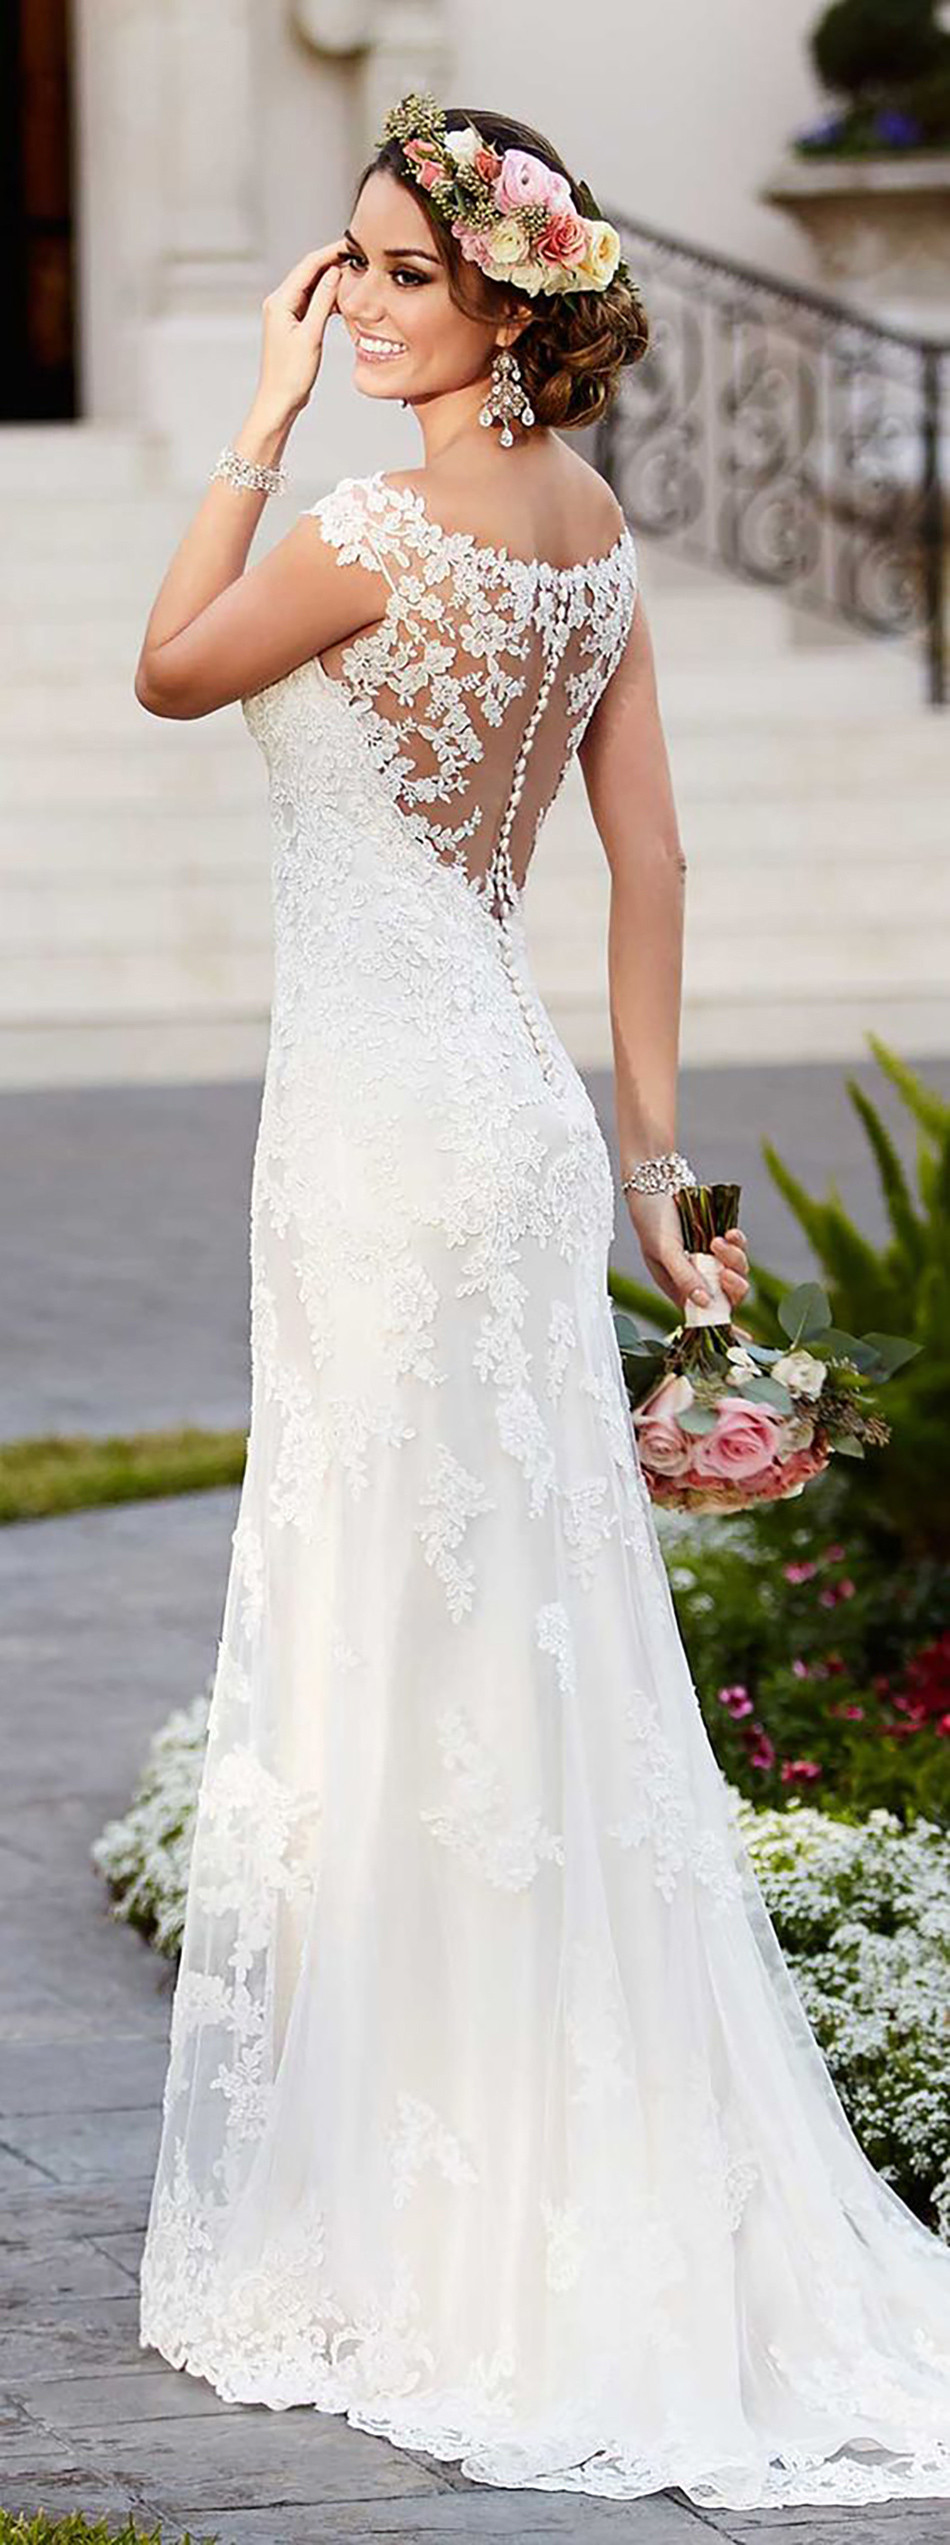 Popular Wedding Dresses
 These are the 5 most popular wedding dresses on Pinterest